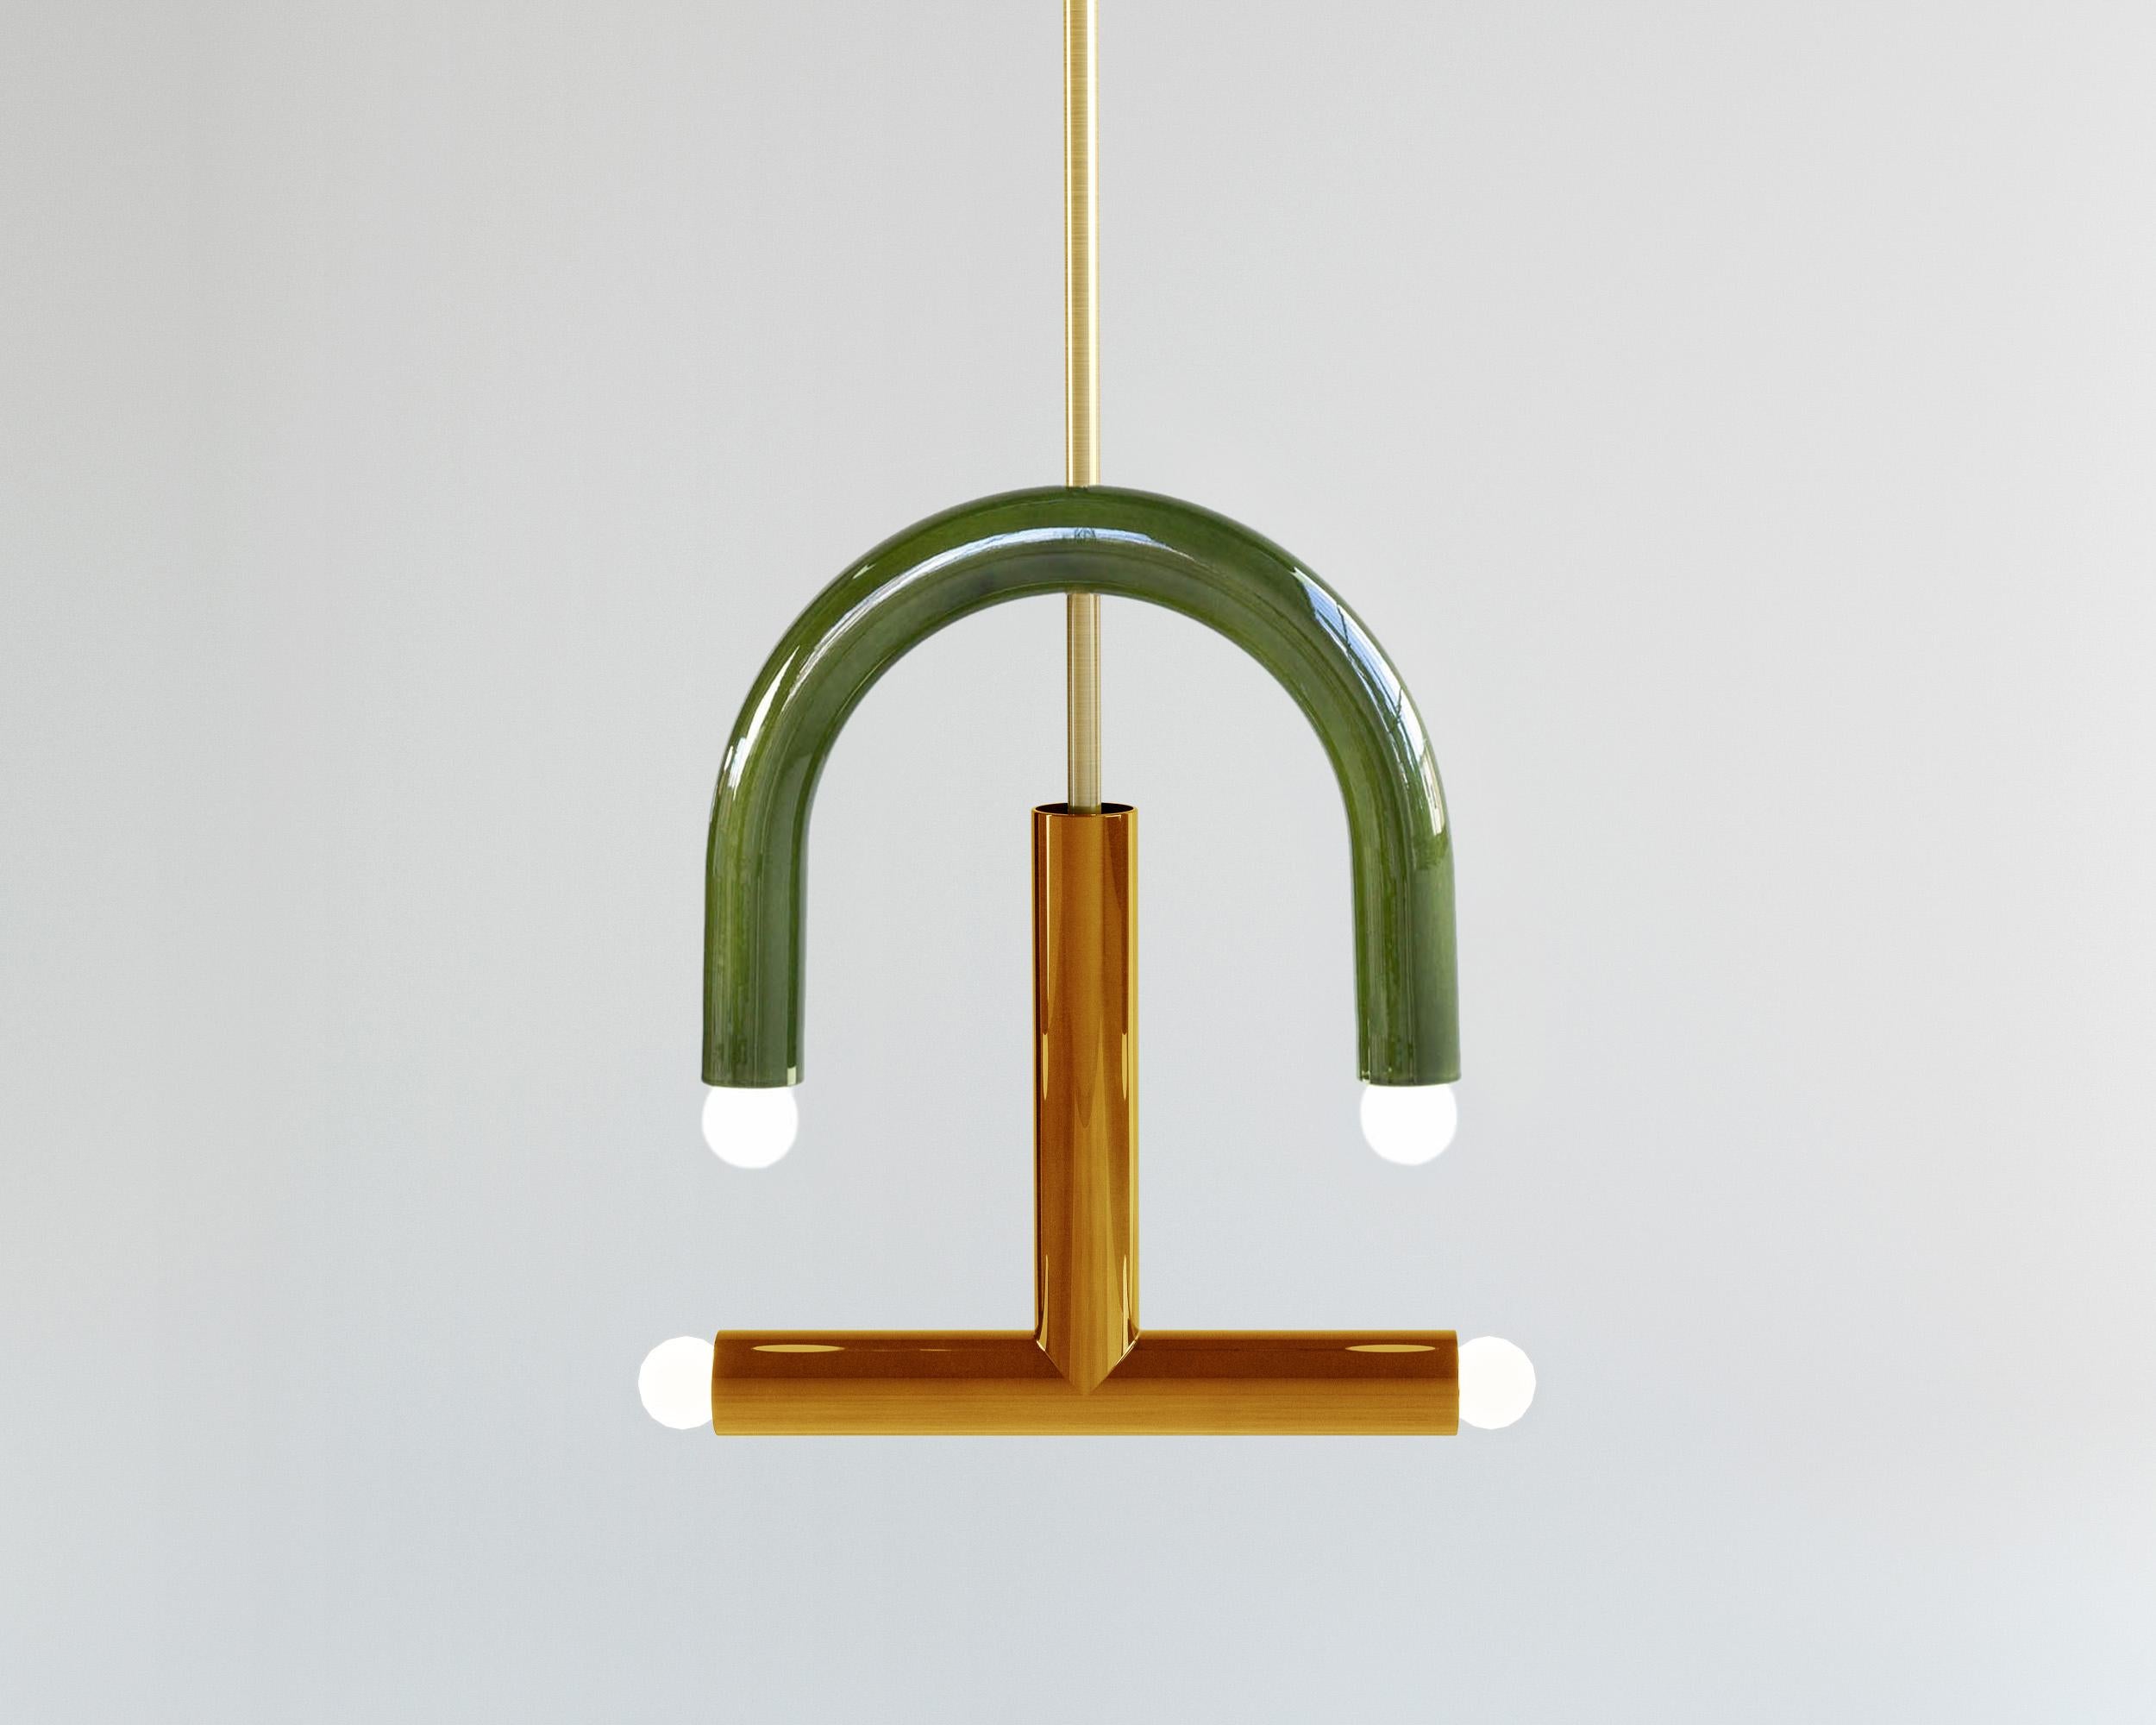 TRN C3 Pendant lamp / ceiling lamp / chandelier 
Designer: Pani Jurek

Dimensions: H 45 x 35 x 5 cm
Model shown: Green & ochre

Bulb (not included): E27/E26, compatible with US electric system

Materials: Hand glazed ceramic and brass
Rod: brass,